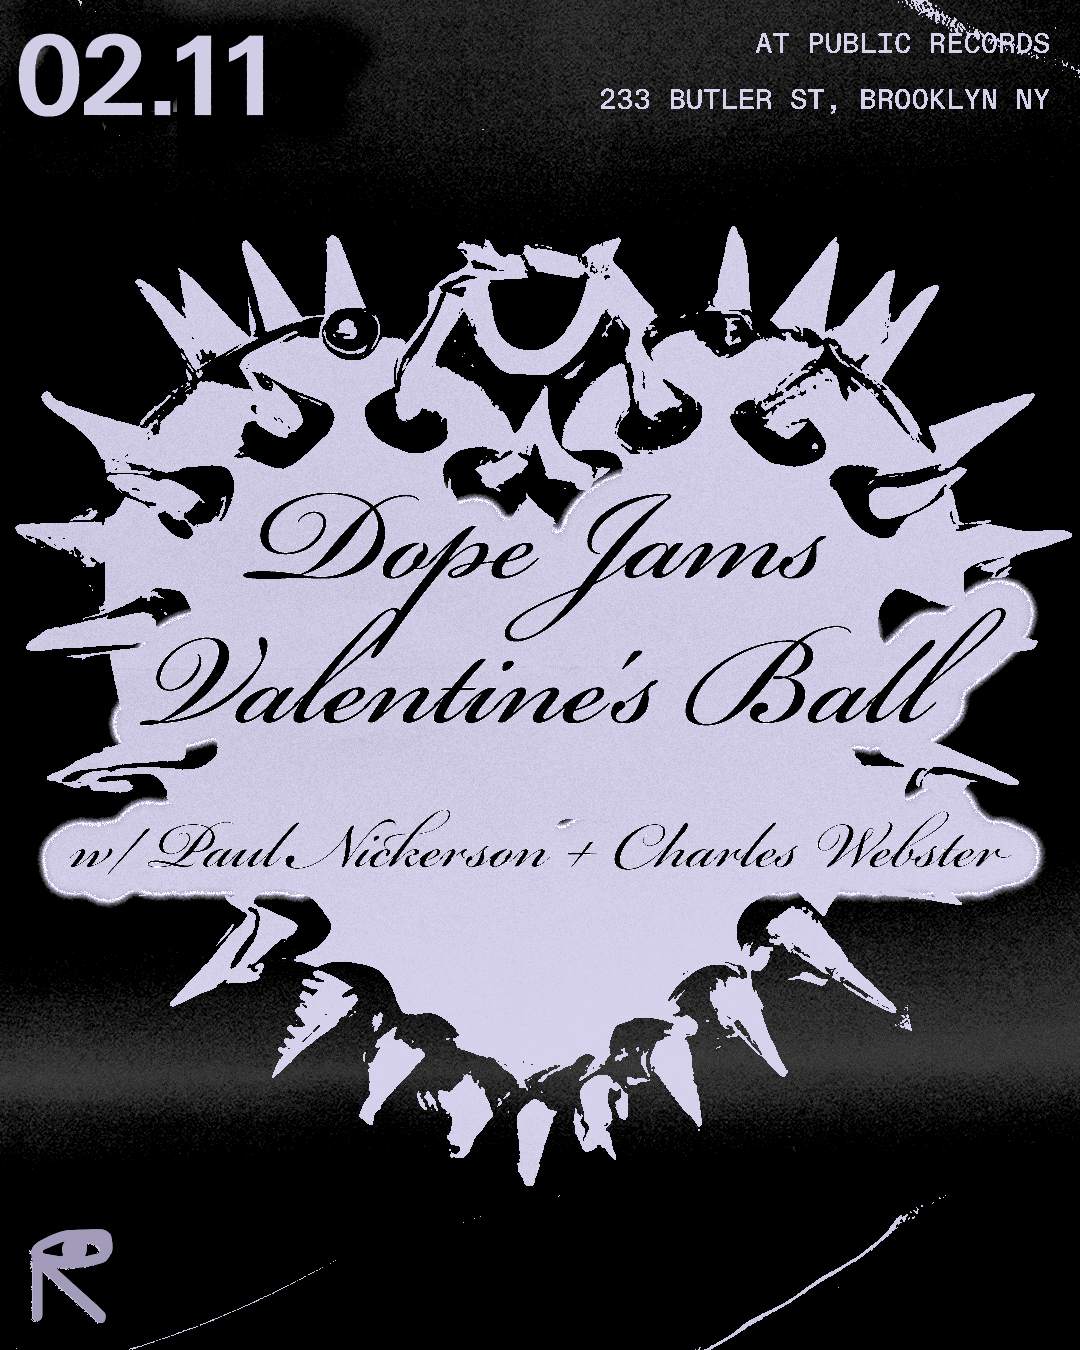 Dope Jams Valentine's Ball with Paul Nickerson + Charles Webster - フライヤー表